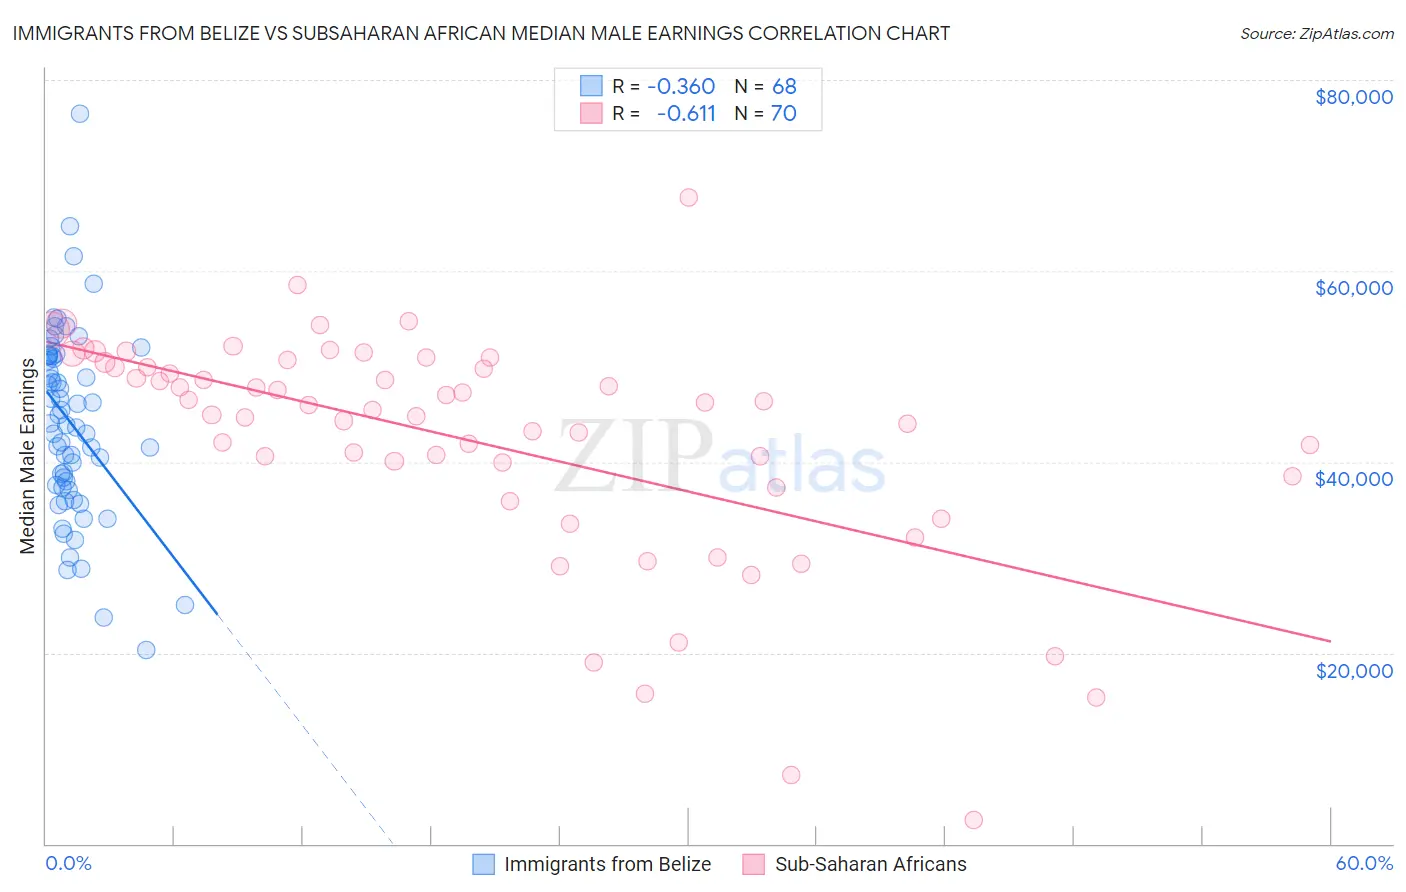 Immigrants from Belize vs Subsaharan African Median Male Earnings